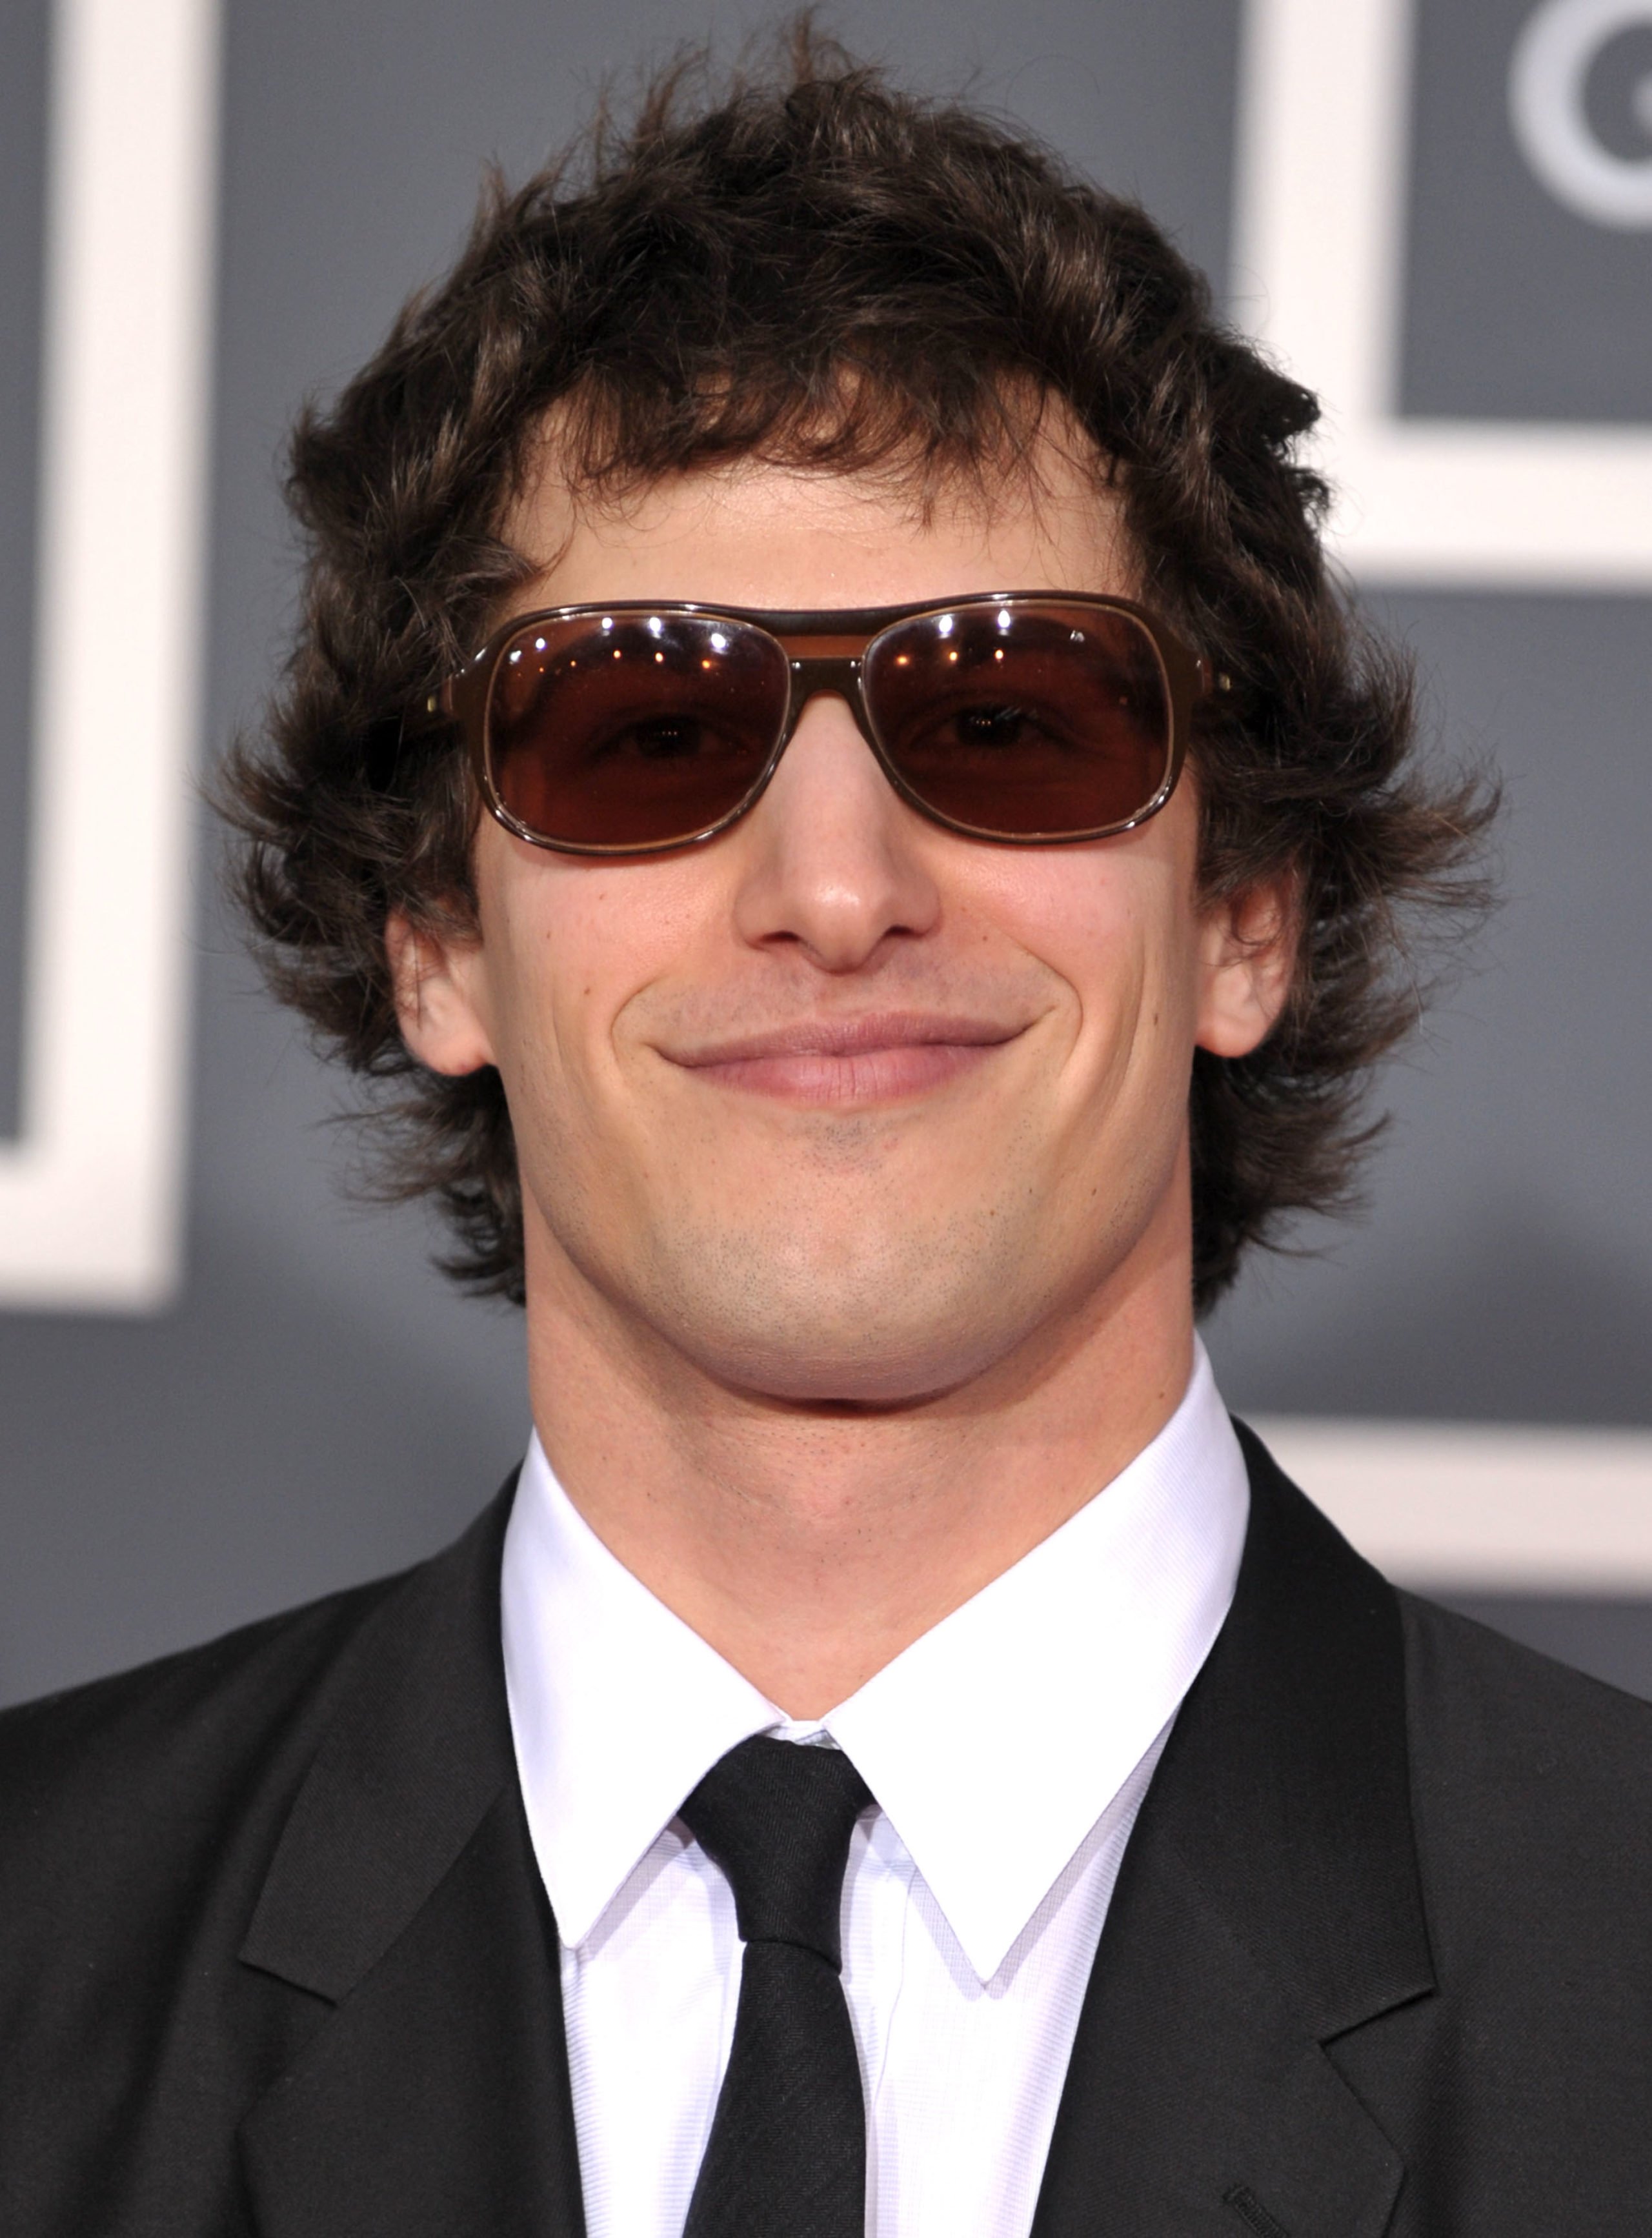 LOS ANGELES, CA - JANUARY 31: Actor Andy Samberg arrives at the 52nd Annual GRAMMY Awards held at Staples Center on January 31, 2010 in Los Angeles, California. (Photo by John Shearer/WireImage) Getty Images